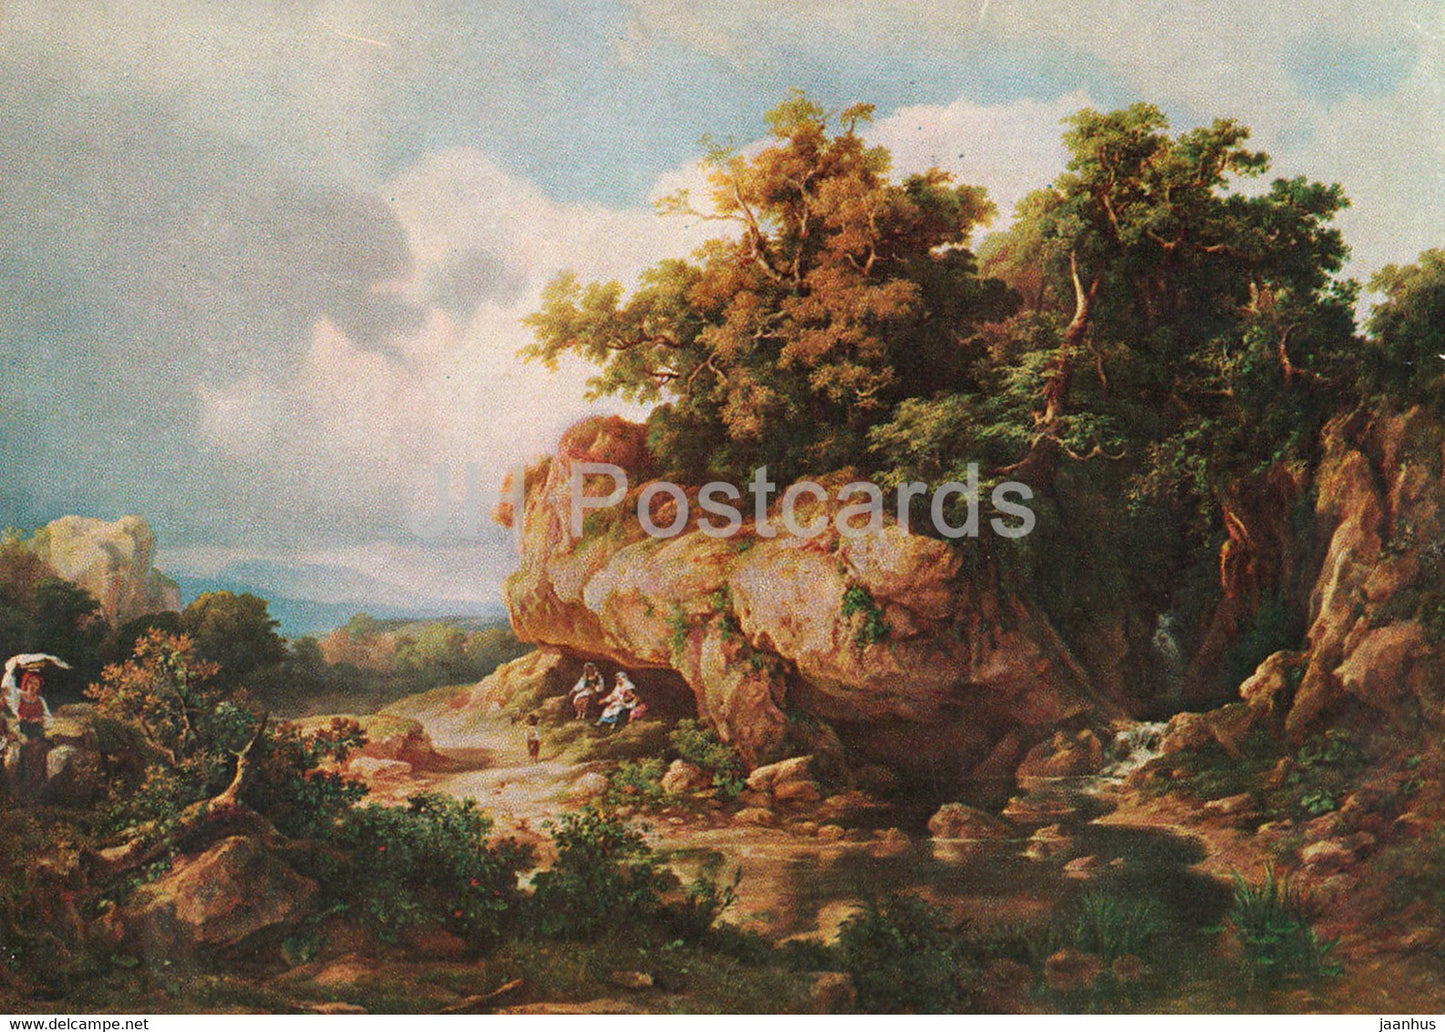 painting by Marko Karoly - Roman Campagna before the storm - Hungarian art - 1968 - Hungary - used - JH Postcards